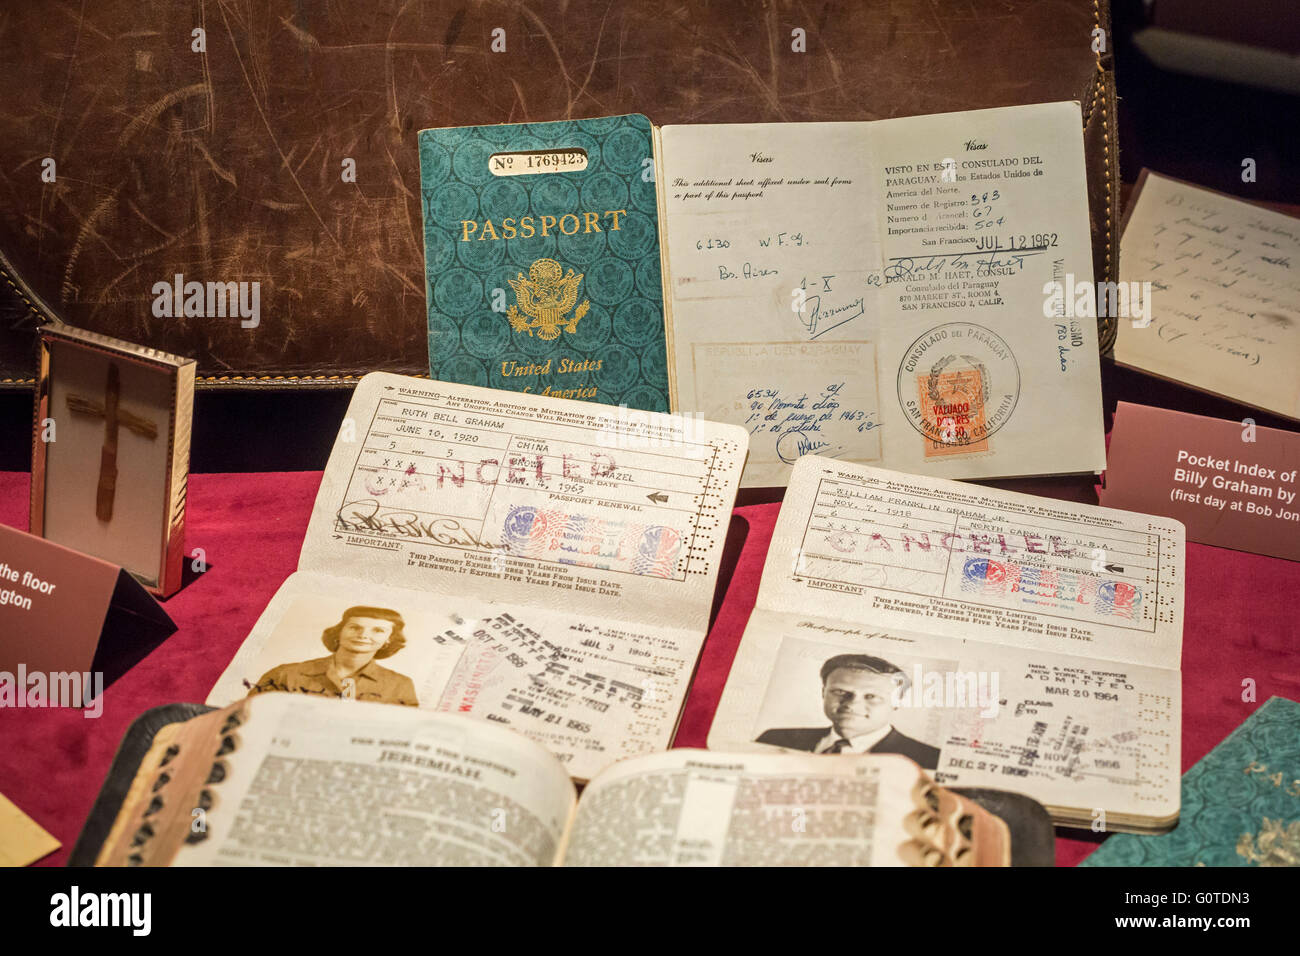 Charlotte, North Carolina - Memorabilia on display at the Billy Graham Library, including Billy and Ruth Graham's passports. Stock Photo